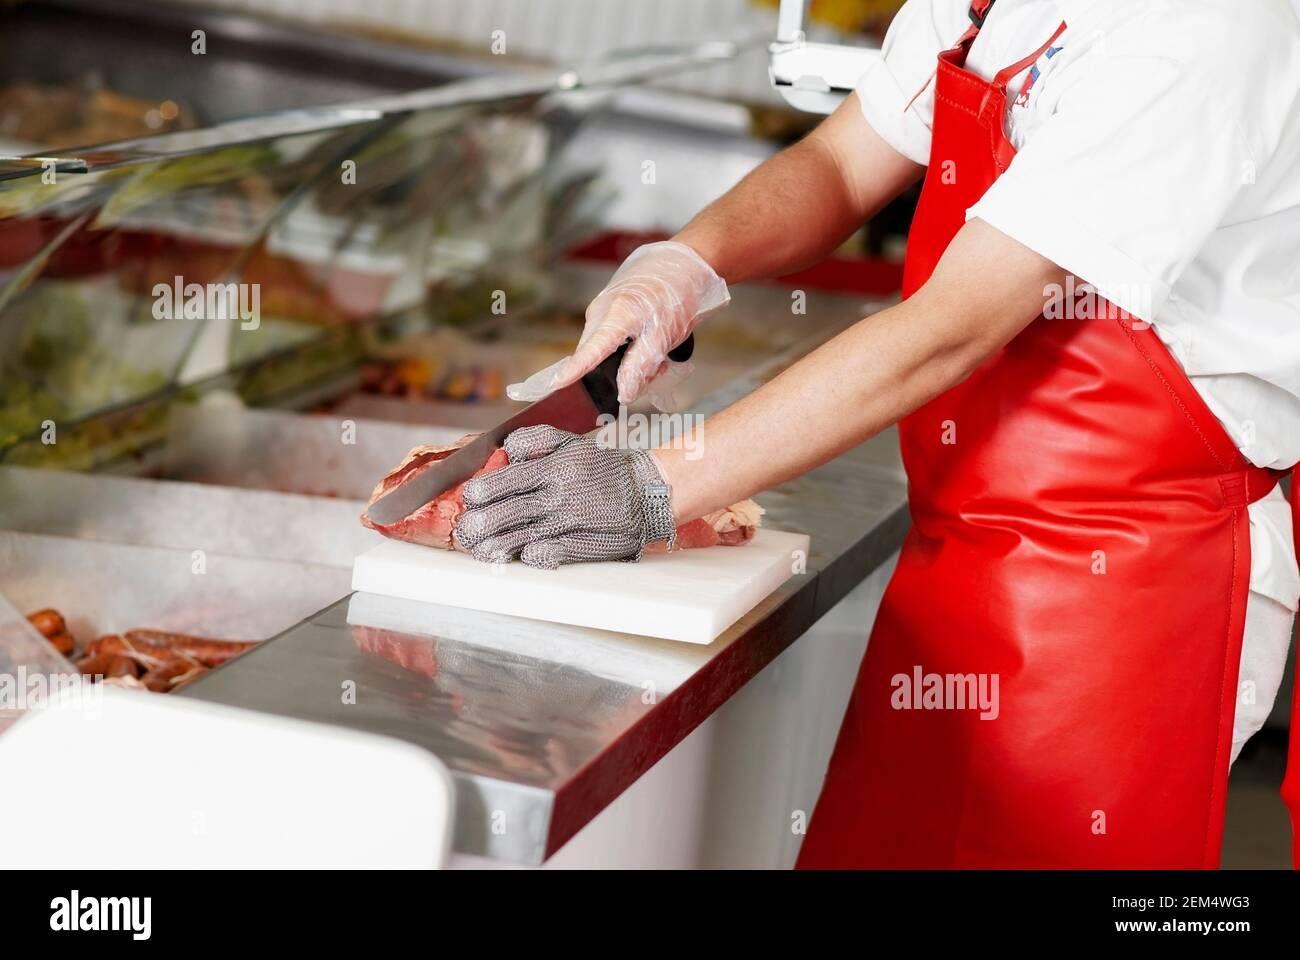 Close-up of a butcher cutting meat in a butcher shop Stock Photo